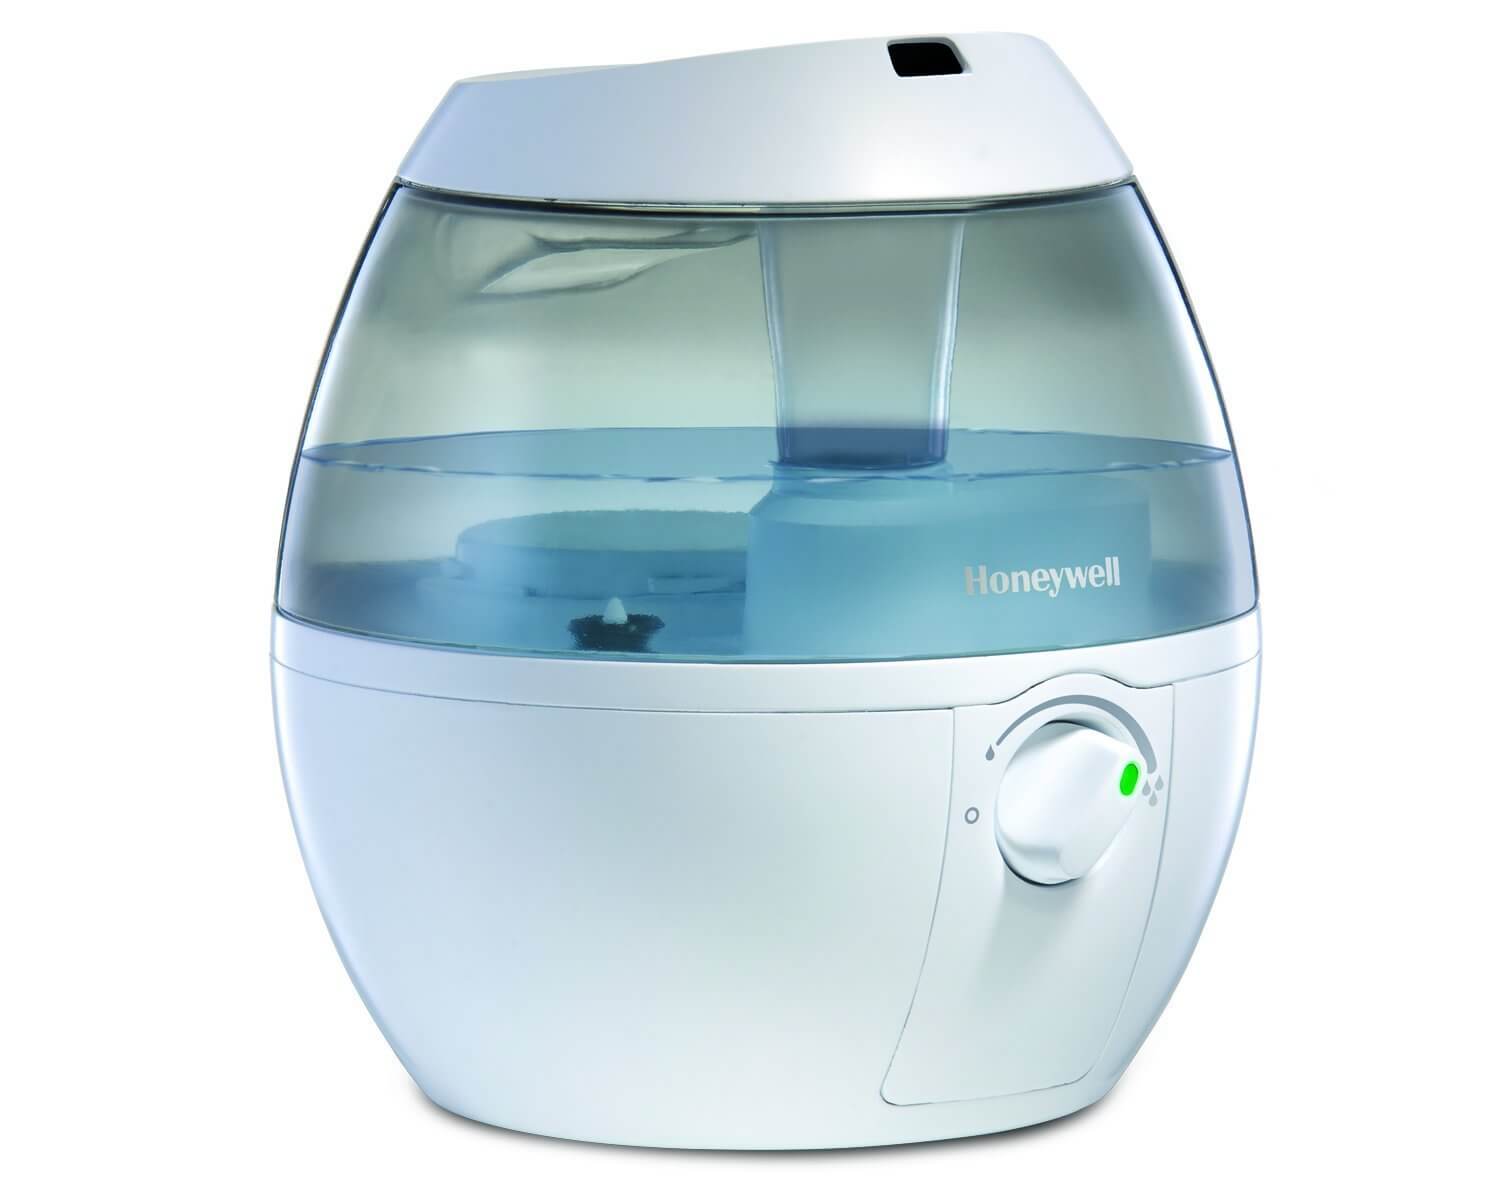 The Honeywell Bedroom Humidifier On The Review